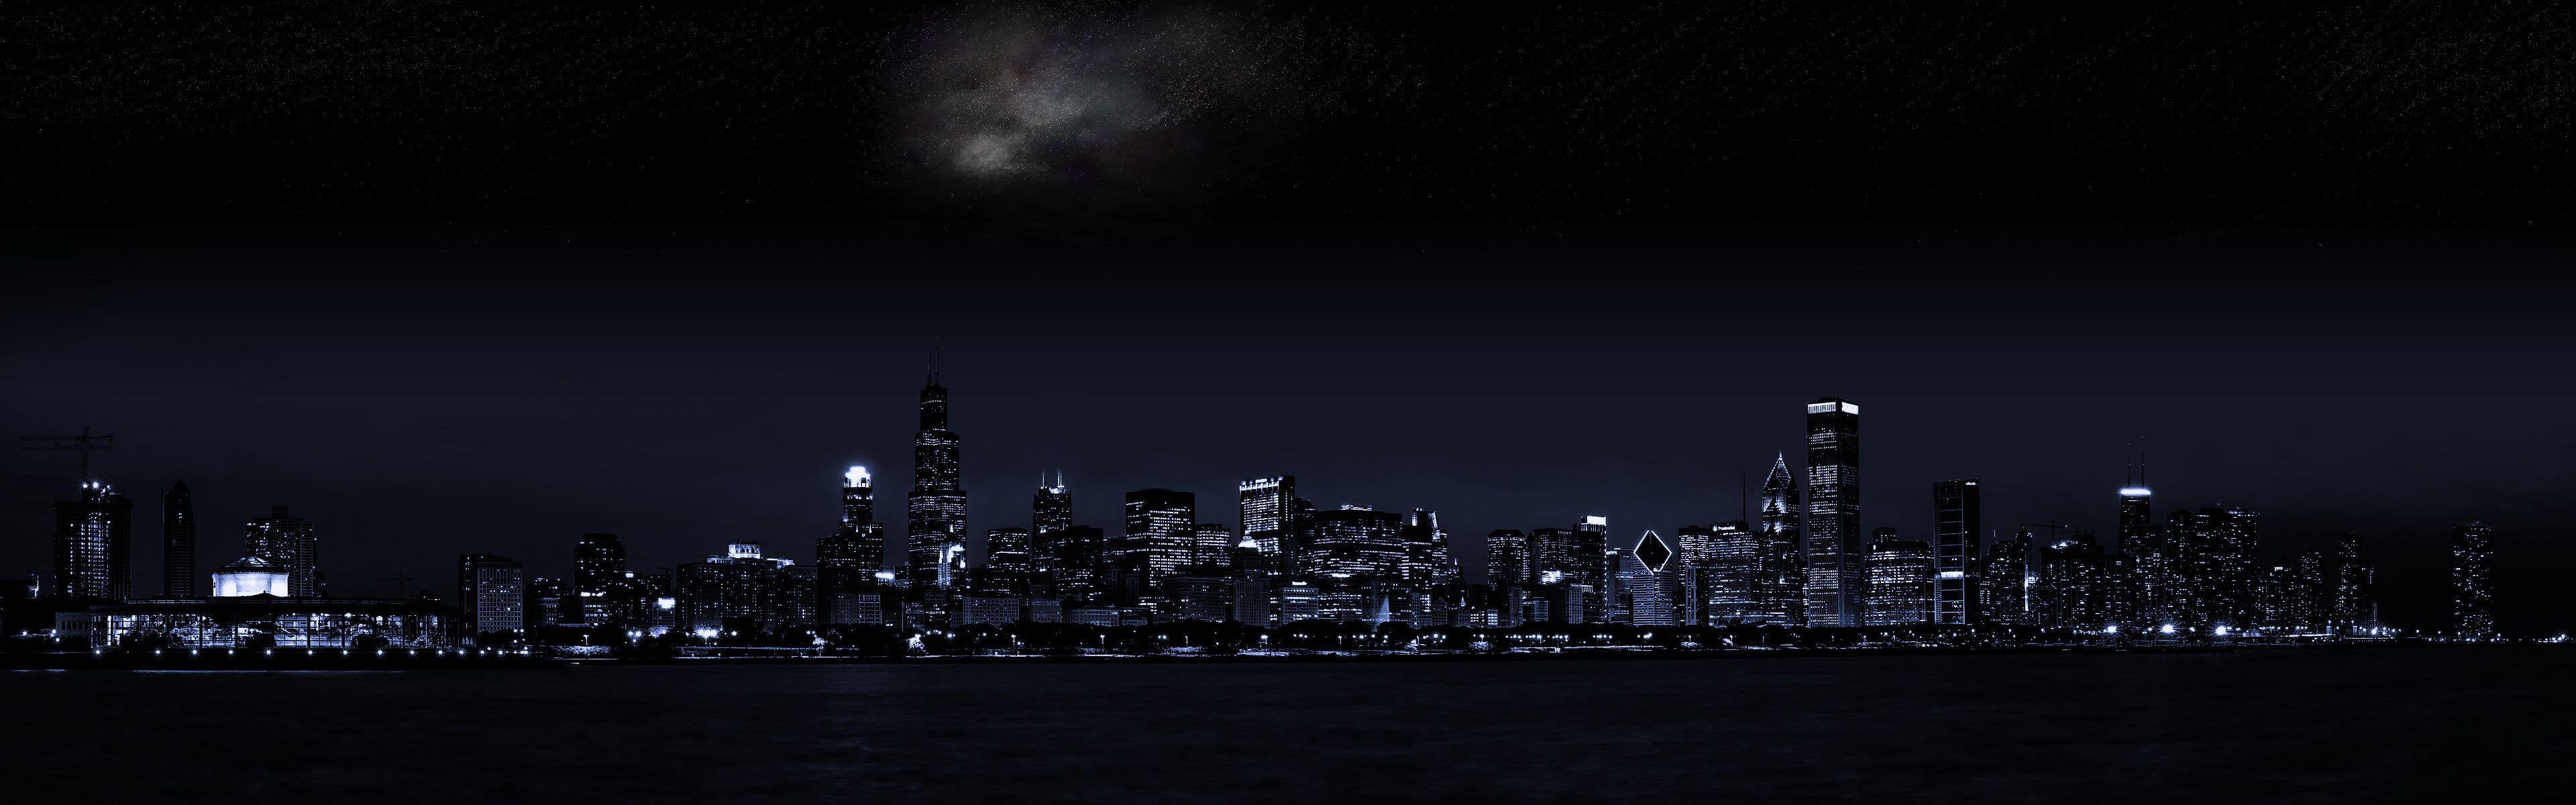 Chicago Skyline Dual Monitor Wallpaper Stolen From Somewhere On